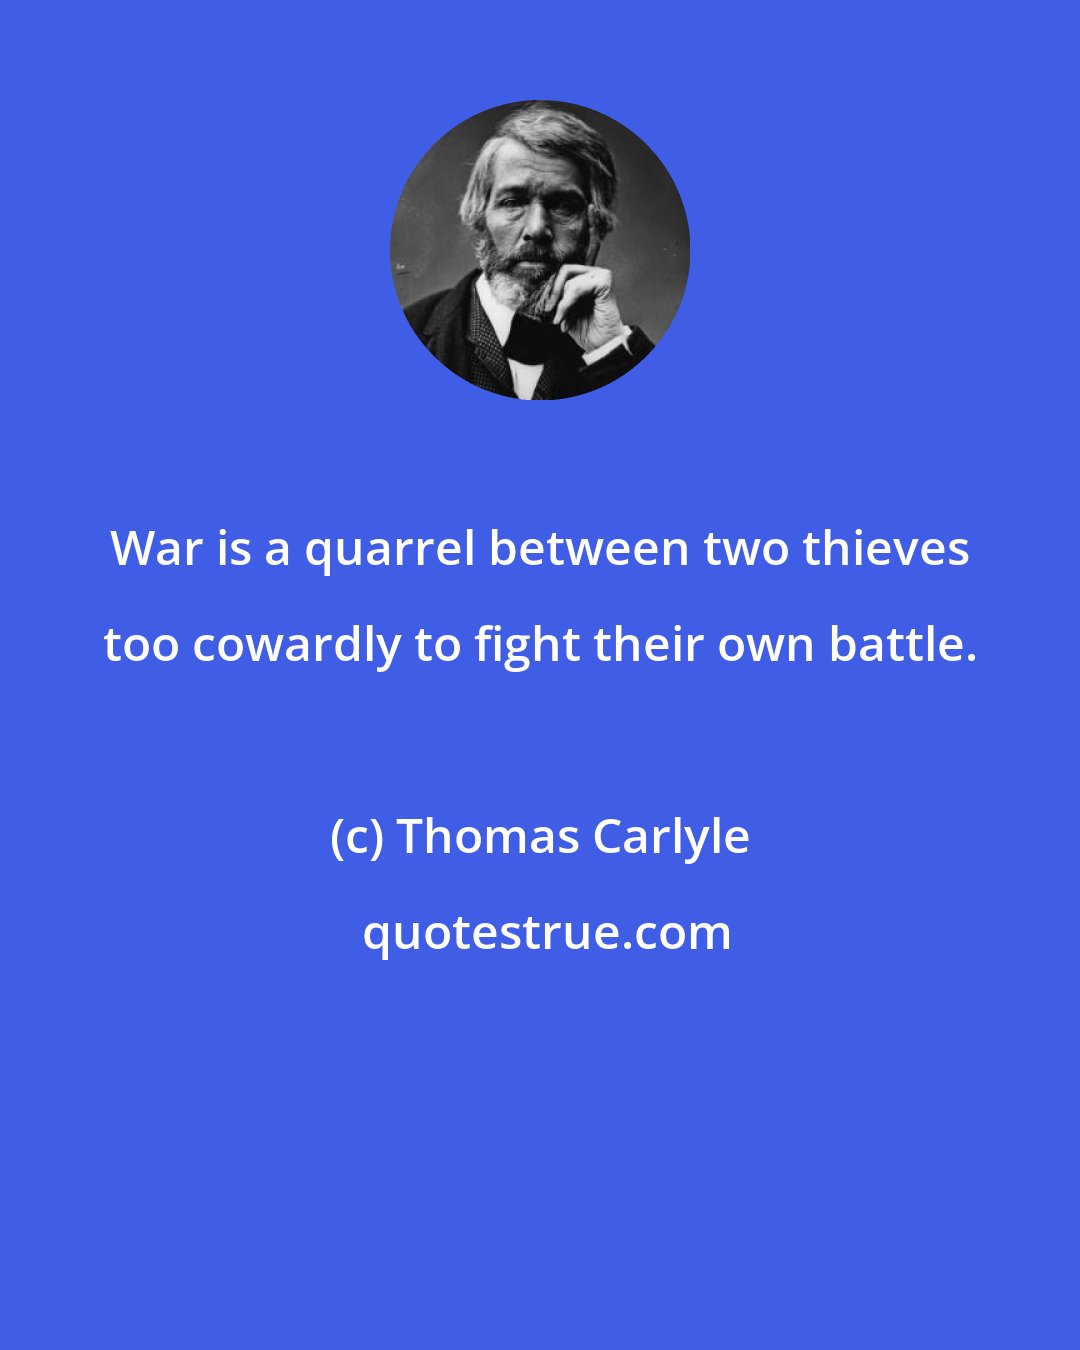 Thomas Carlyle: War is a quarrel between two thieves too cowardly to fight their own battle.